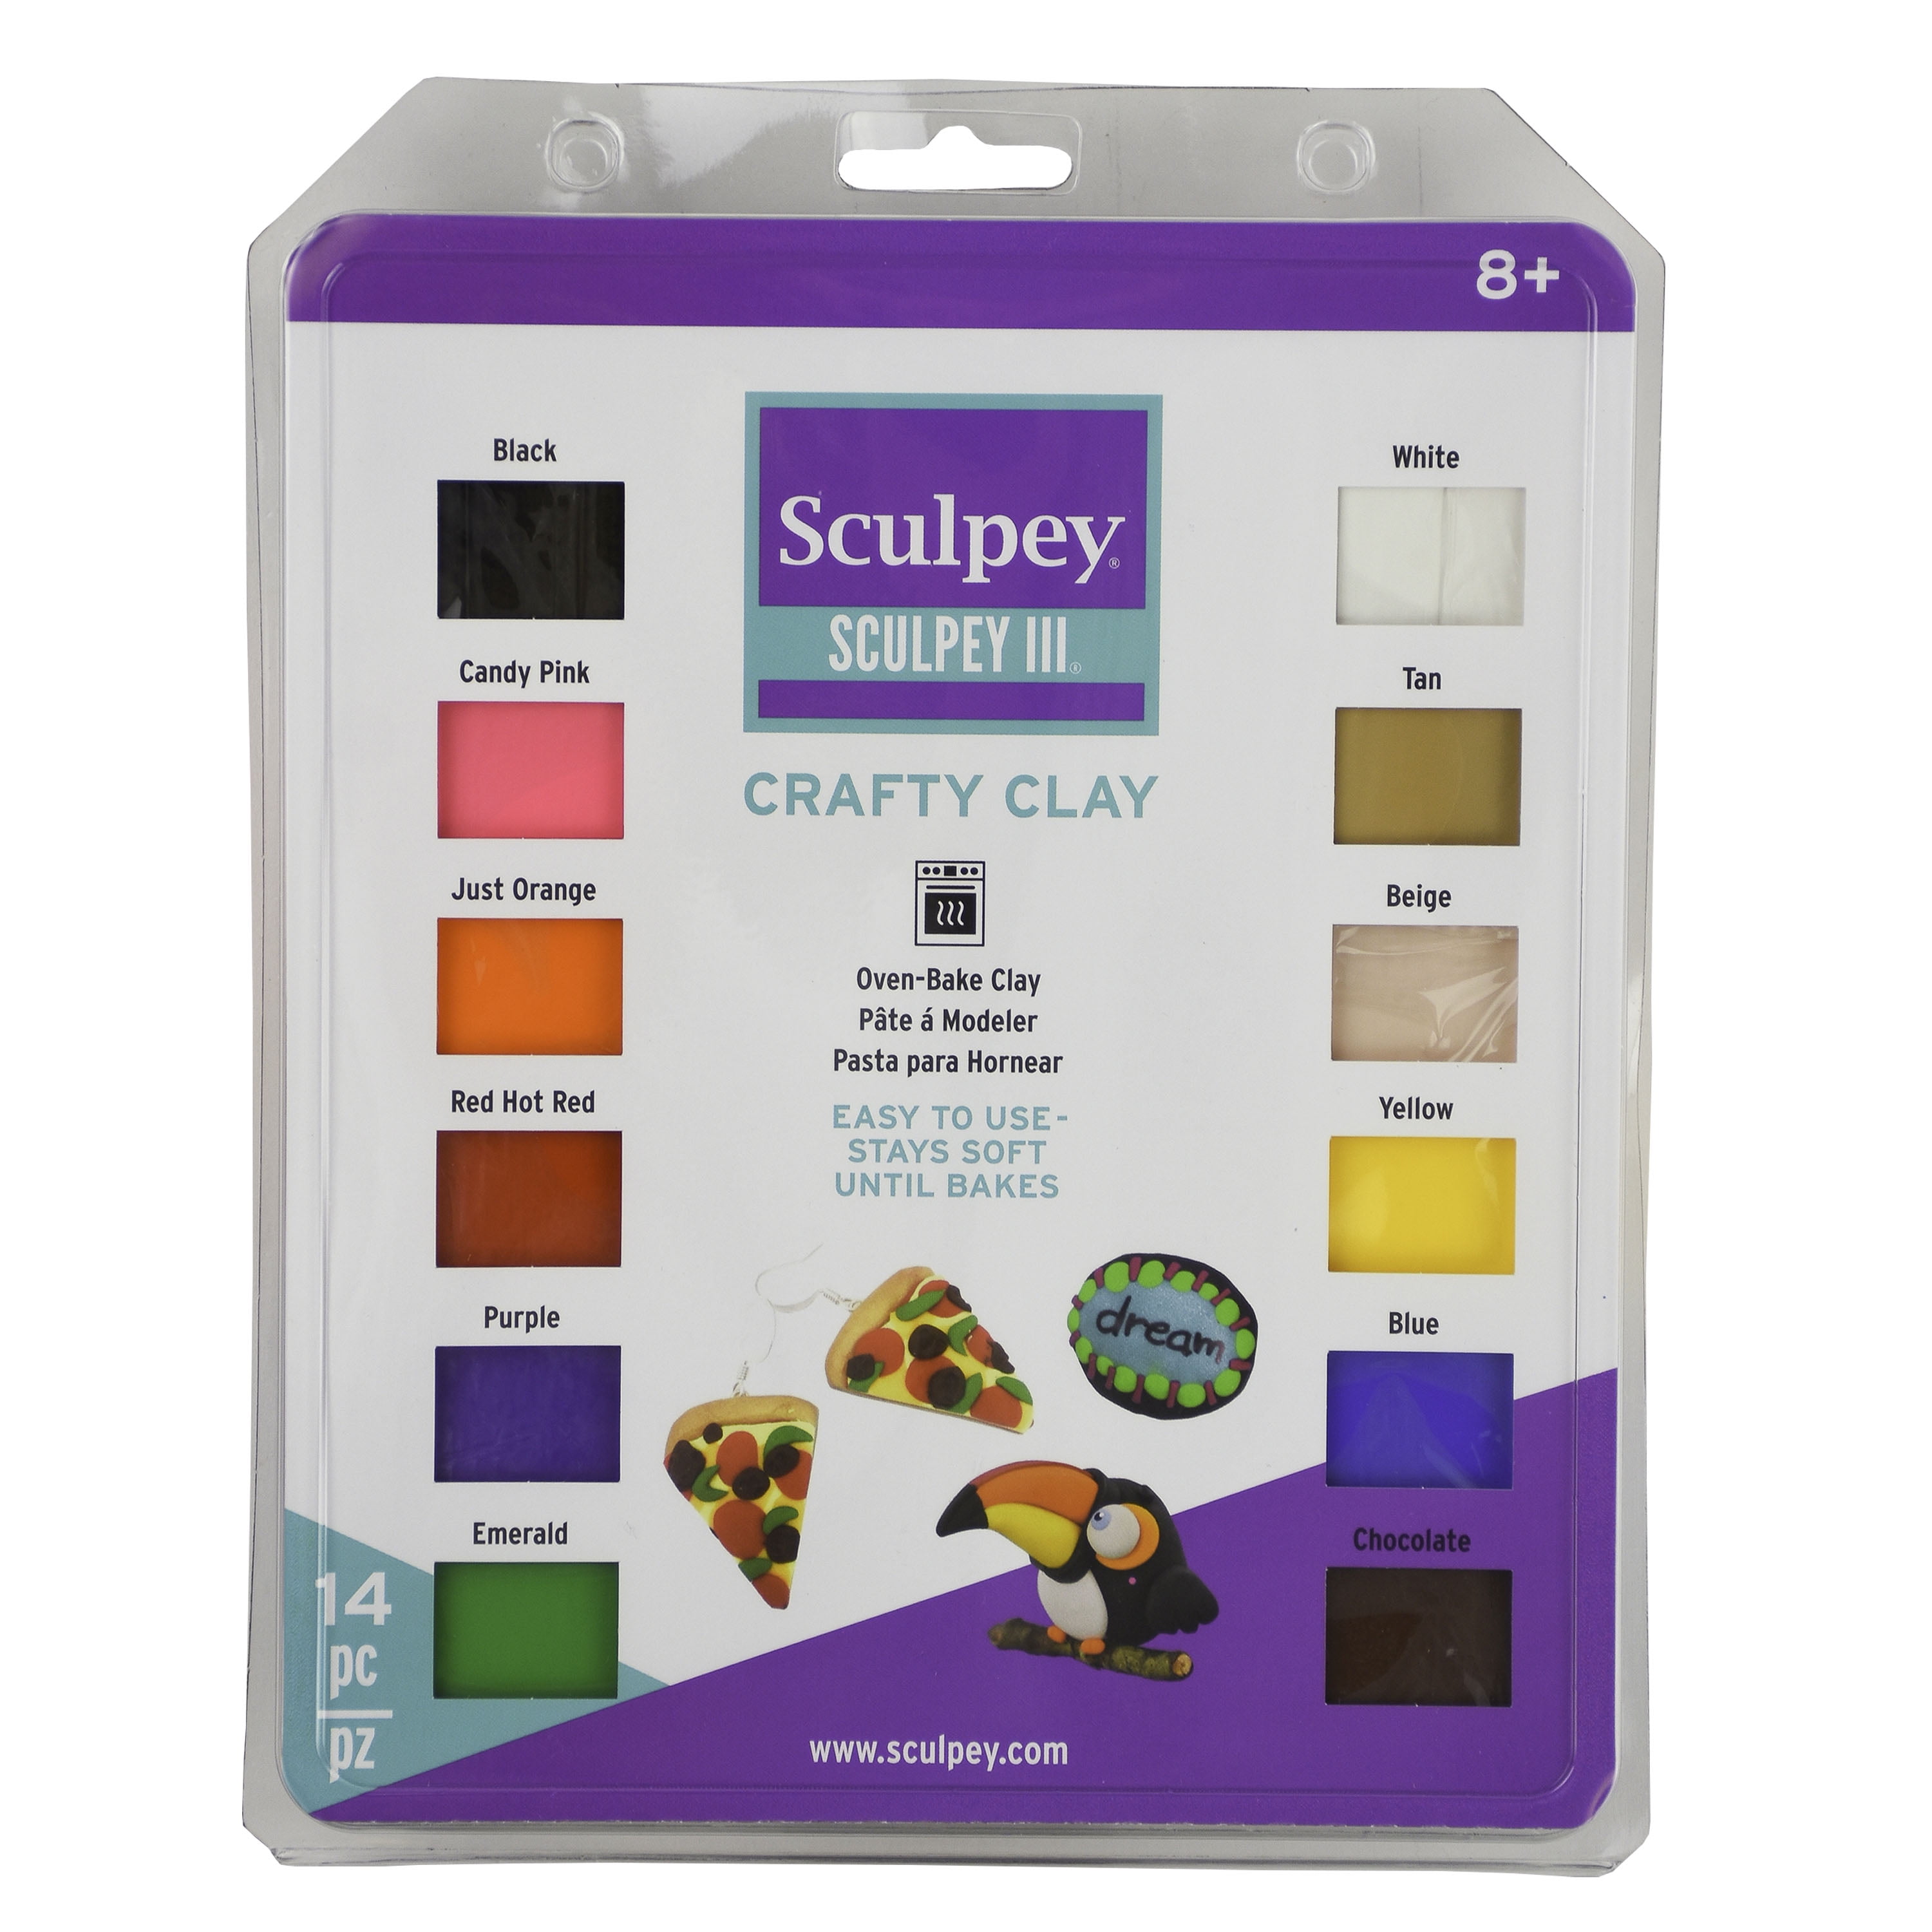 Sculpey Crafty & Oven Bake Clay Variety Pack, 14 Count Age Group +8